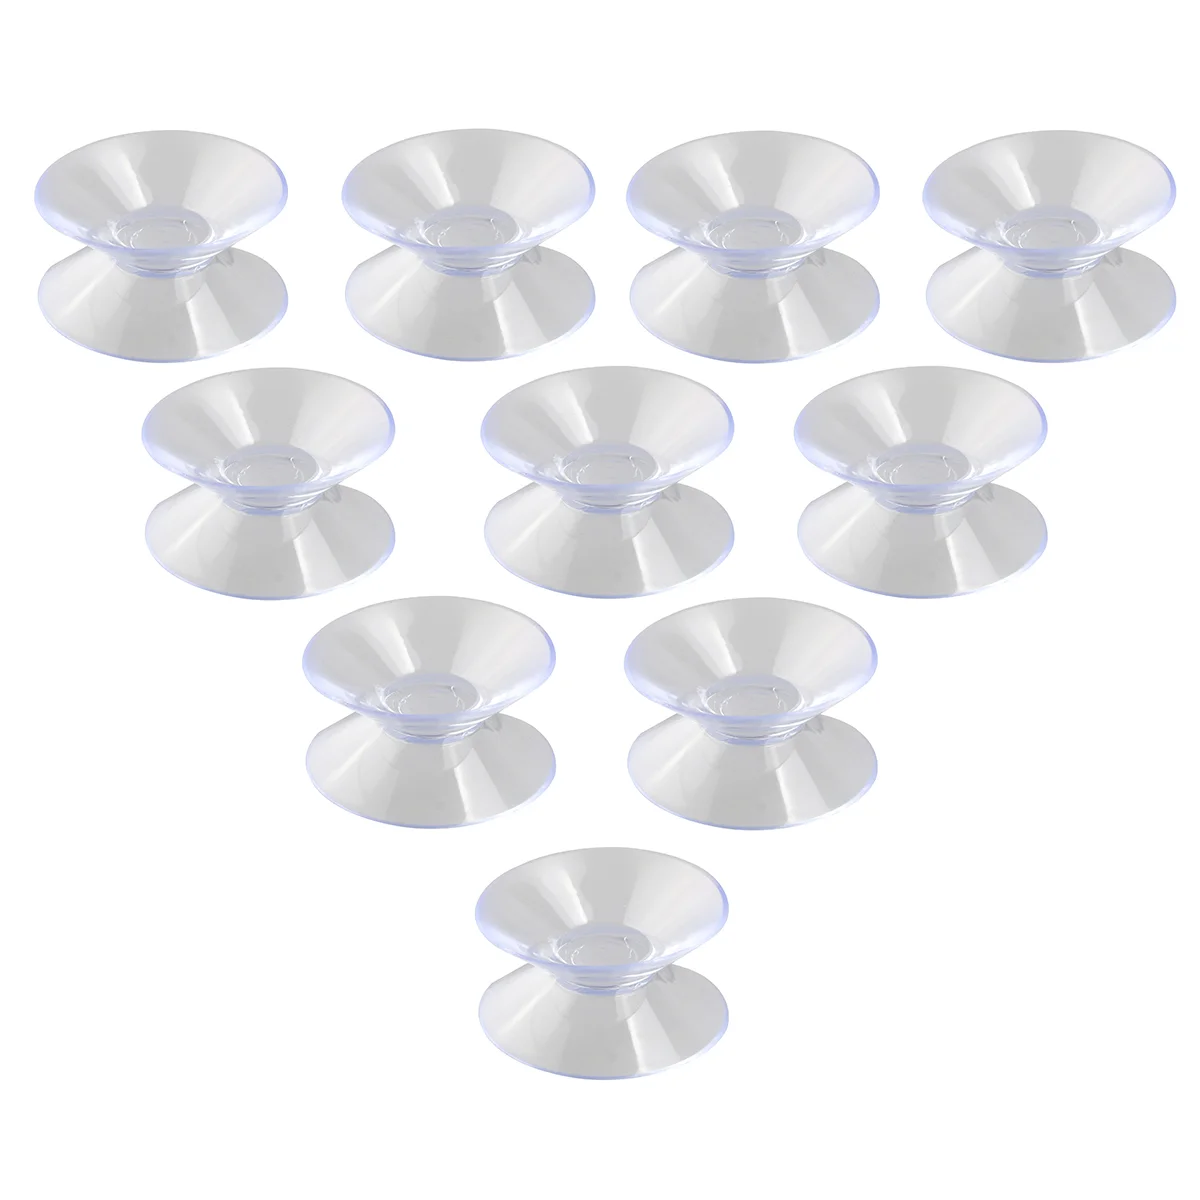 

NUOLUX 30mm Double Sided Suction Cups Sucker Pads for Glass Plastic (Transparent)